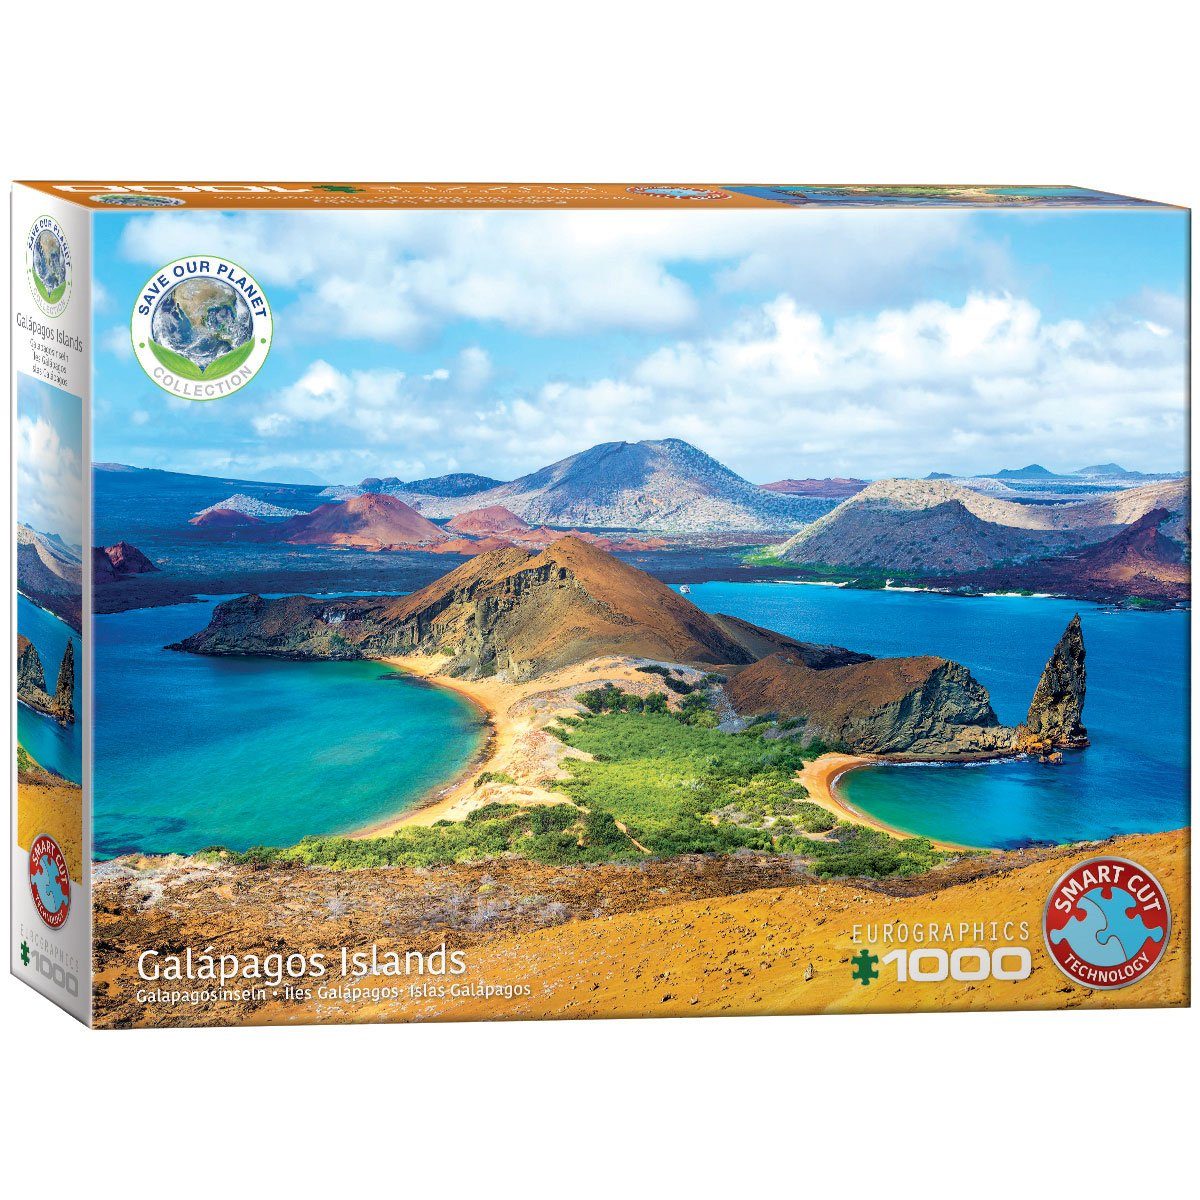 our Puzzle, Save EUROGRAPHICS in Galapagosinseln Europe Planet 1000 Puzzleteile, Puzzle Made